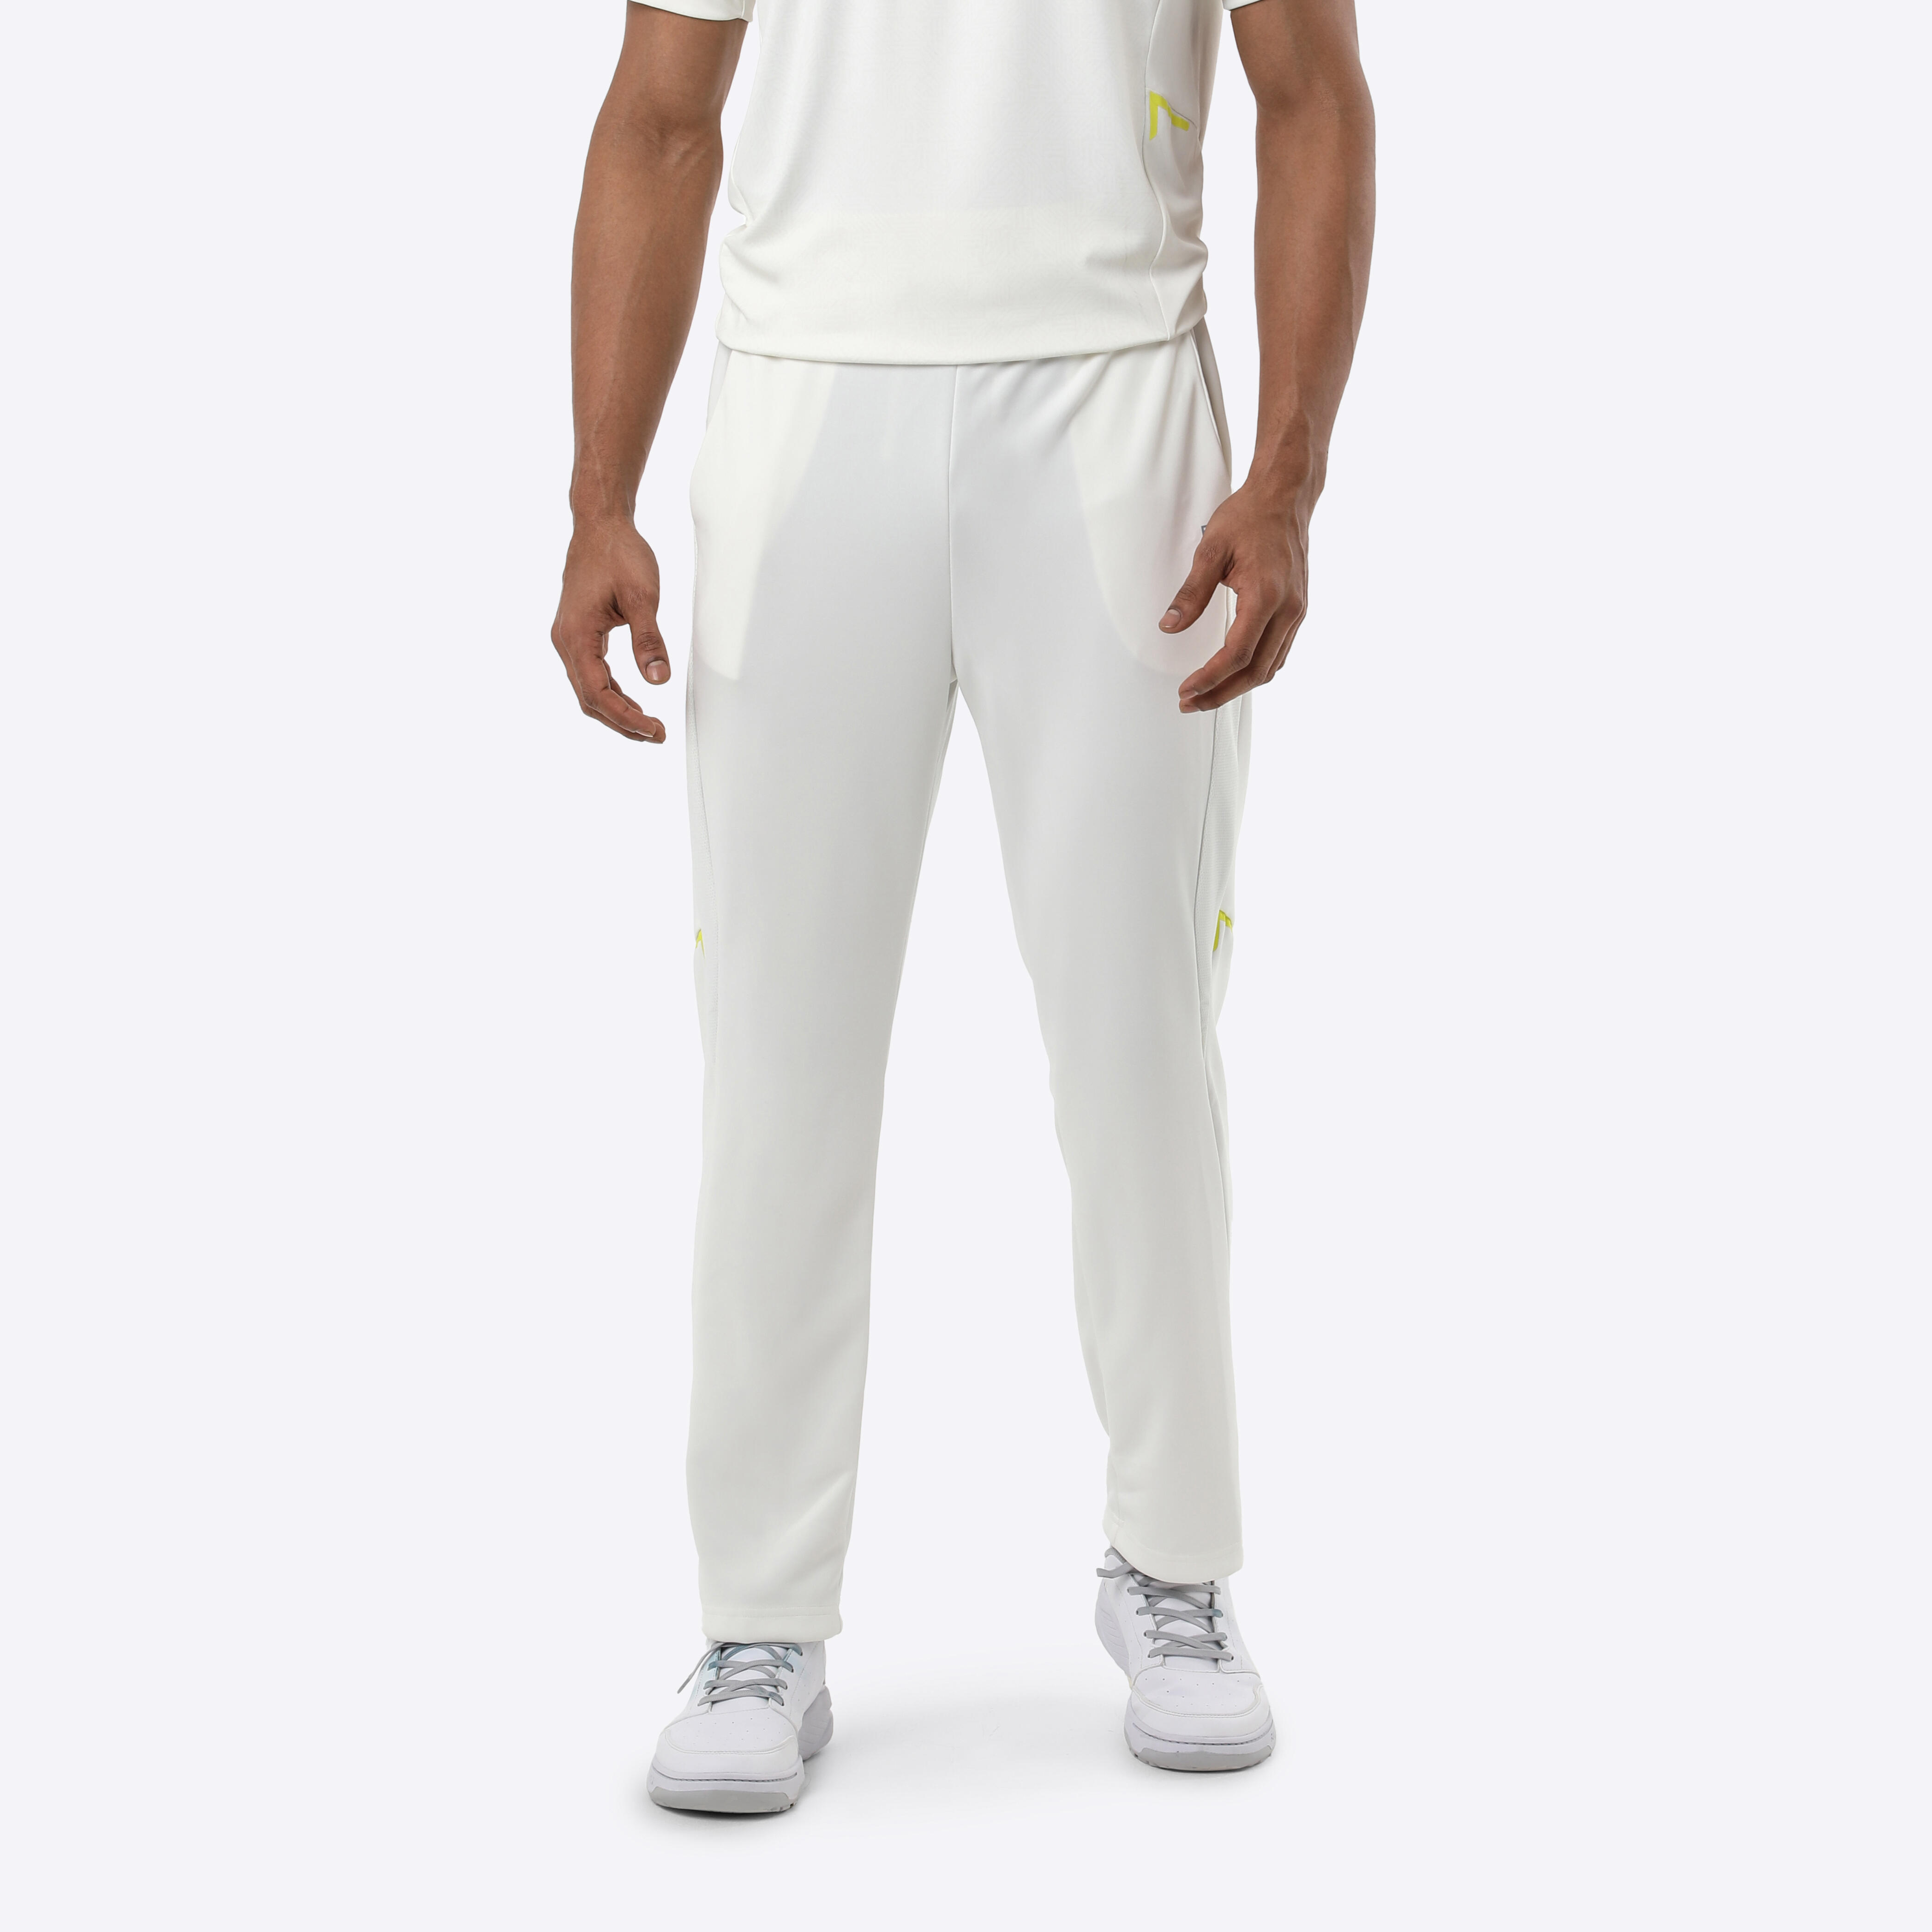 Shrey Cricket Match Coloured Trousers Navy  Sports Wing  Shop on